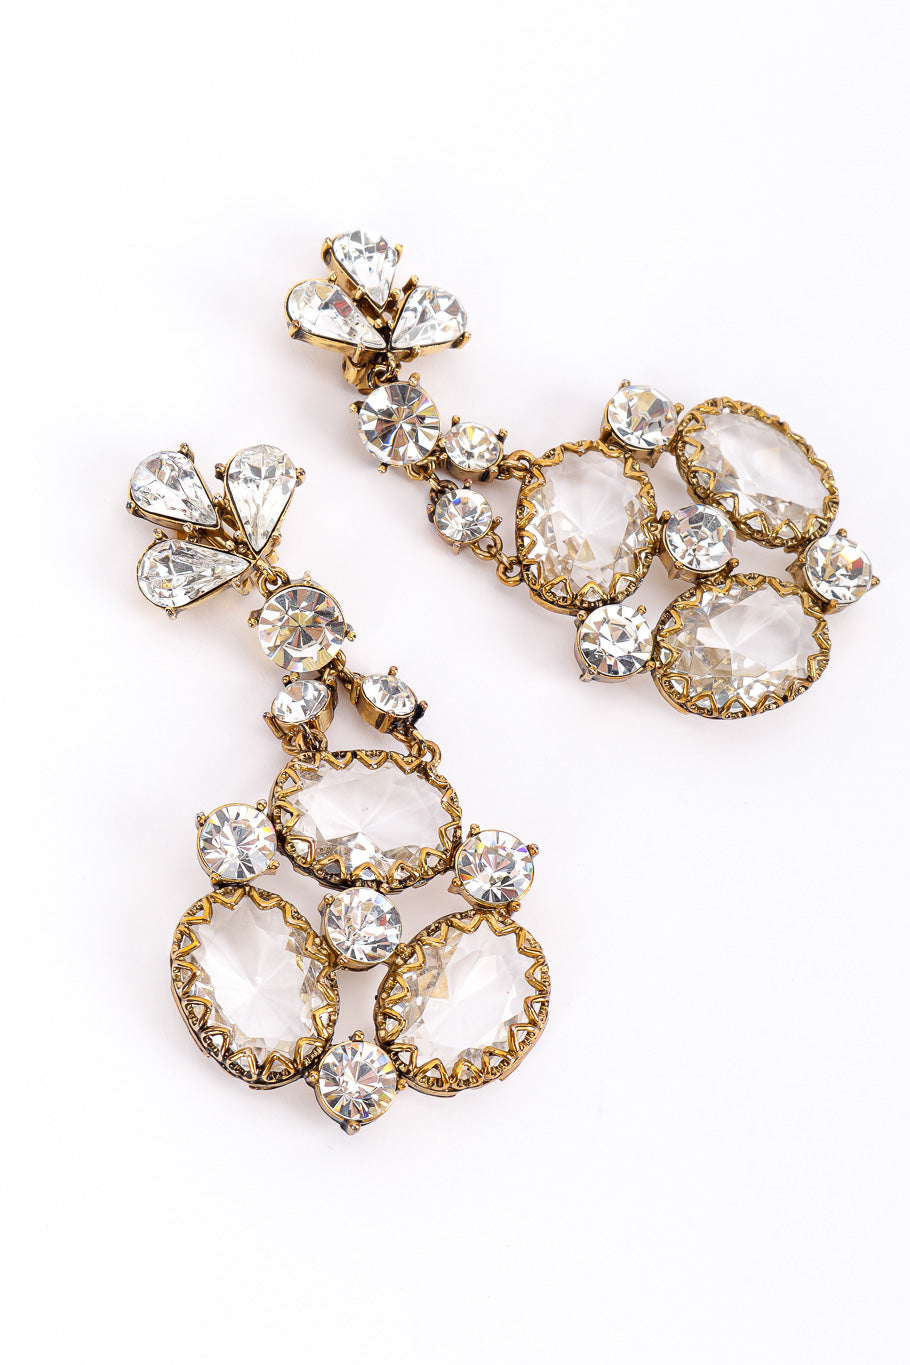 Vintage Crystal Cluster Chandelier Earrings front view on white background closeup @Recessla